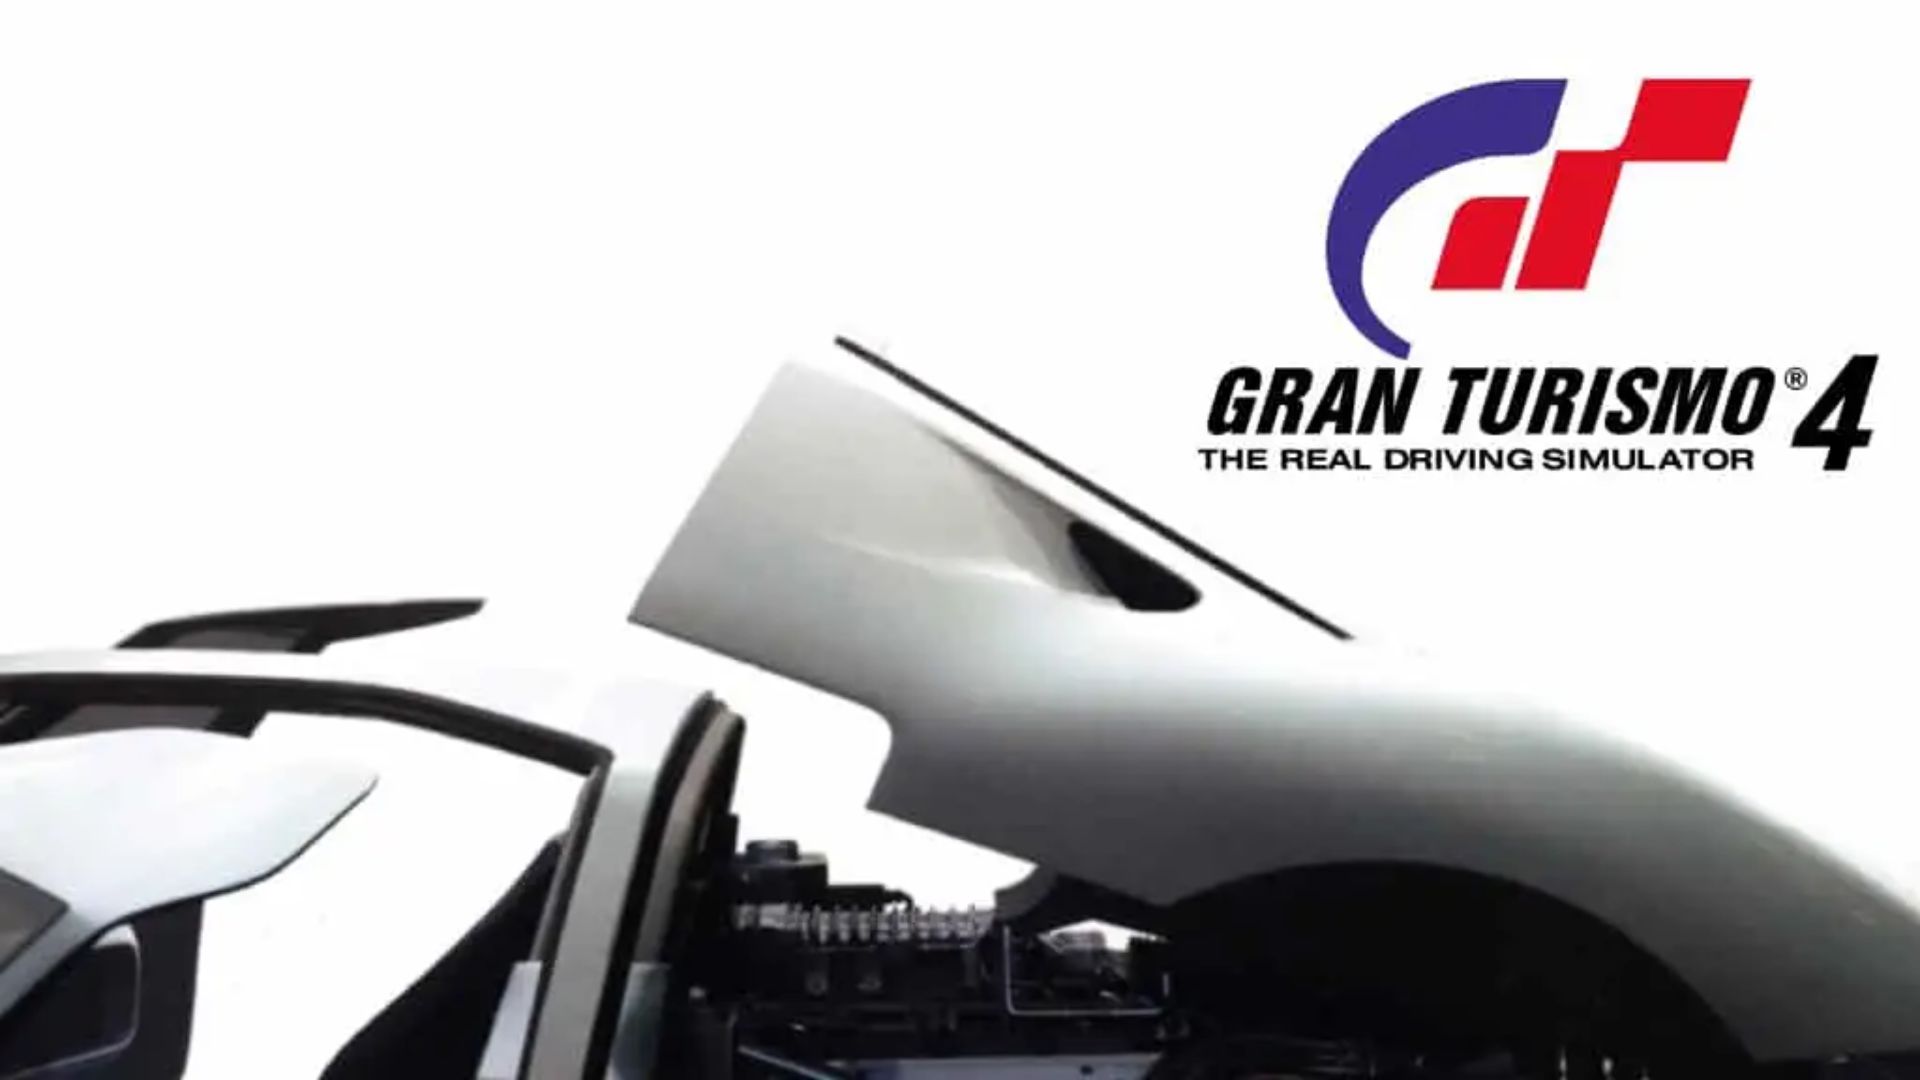 Gran Turismo 4 Cheat Codes Uncovered Nearly 20 Years After Release